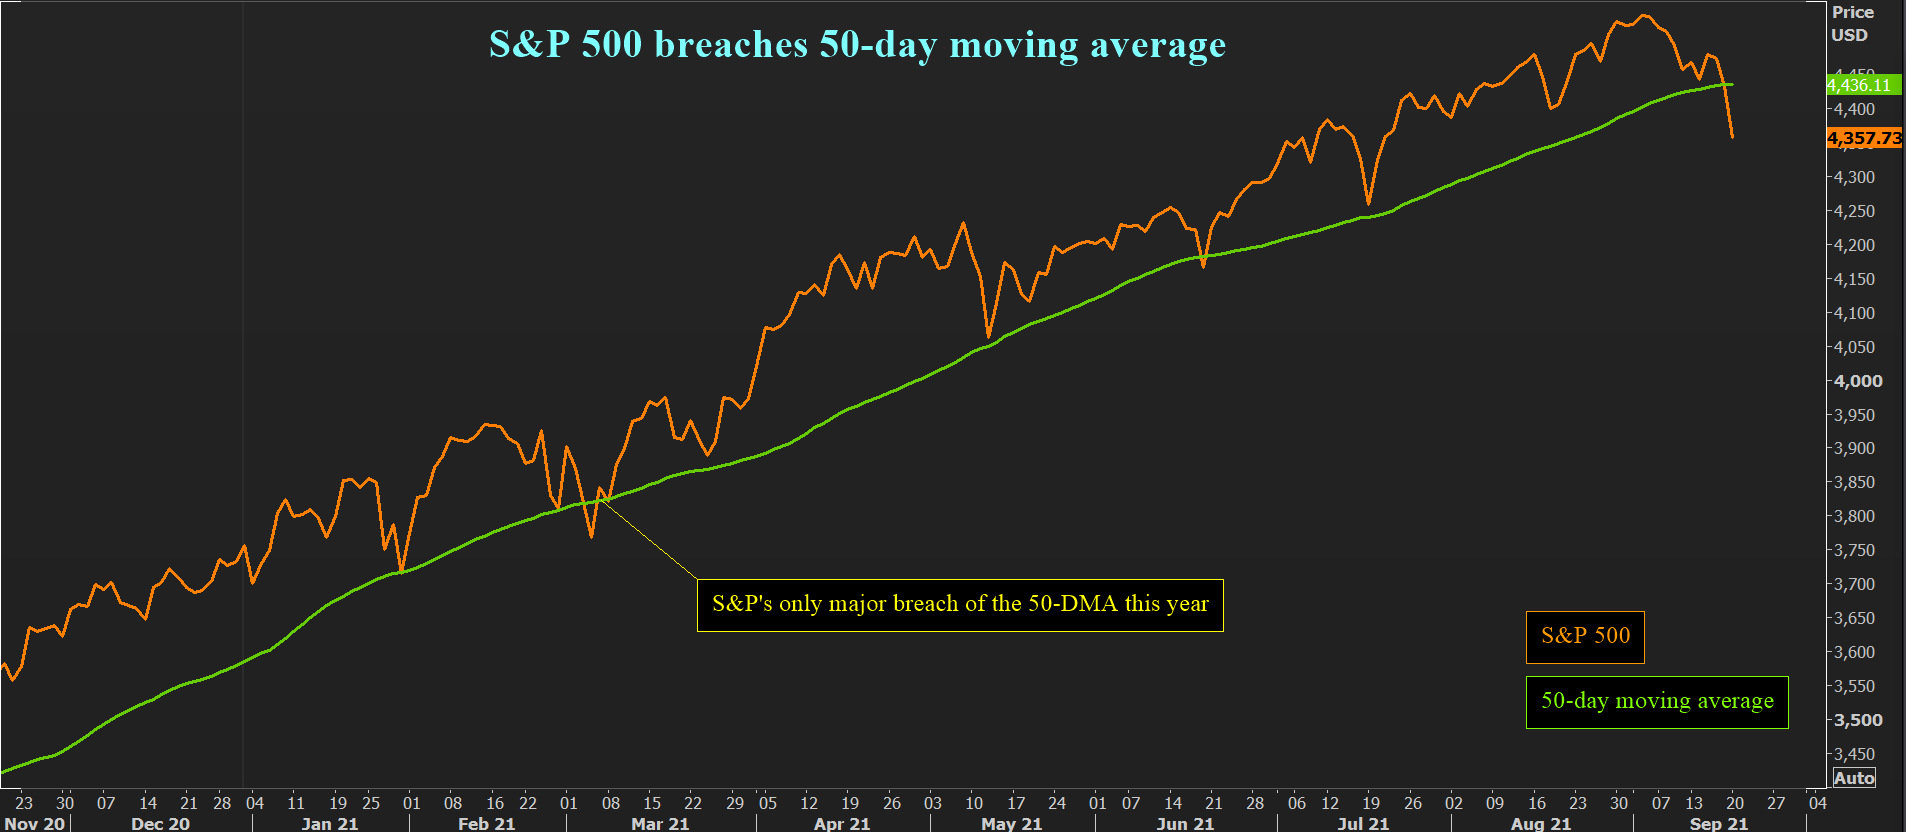 S&P 500 breaches 50-day moving average